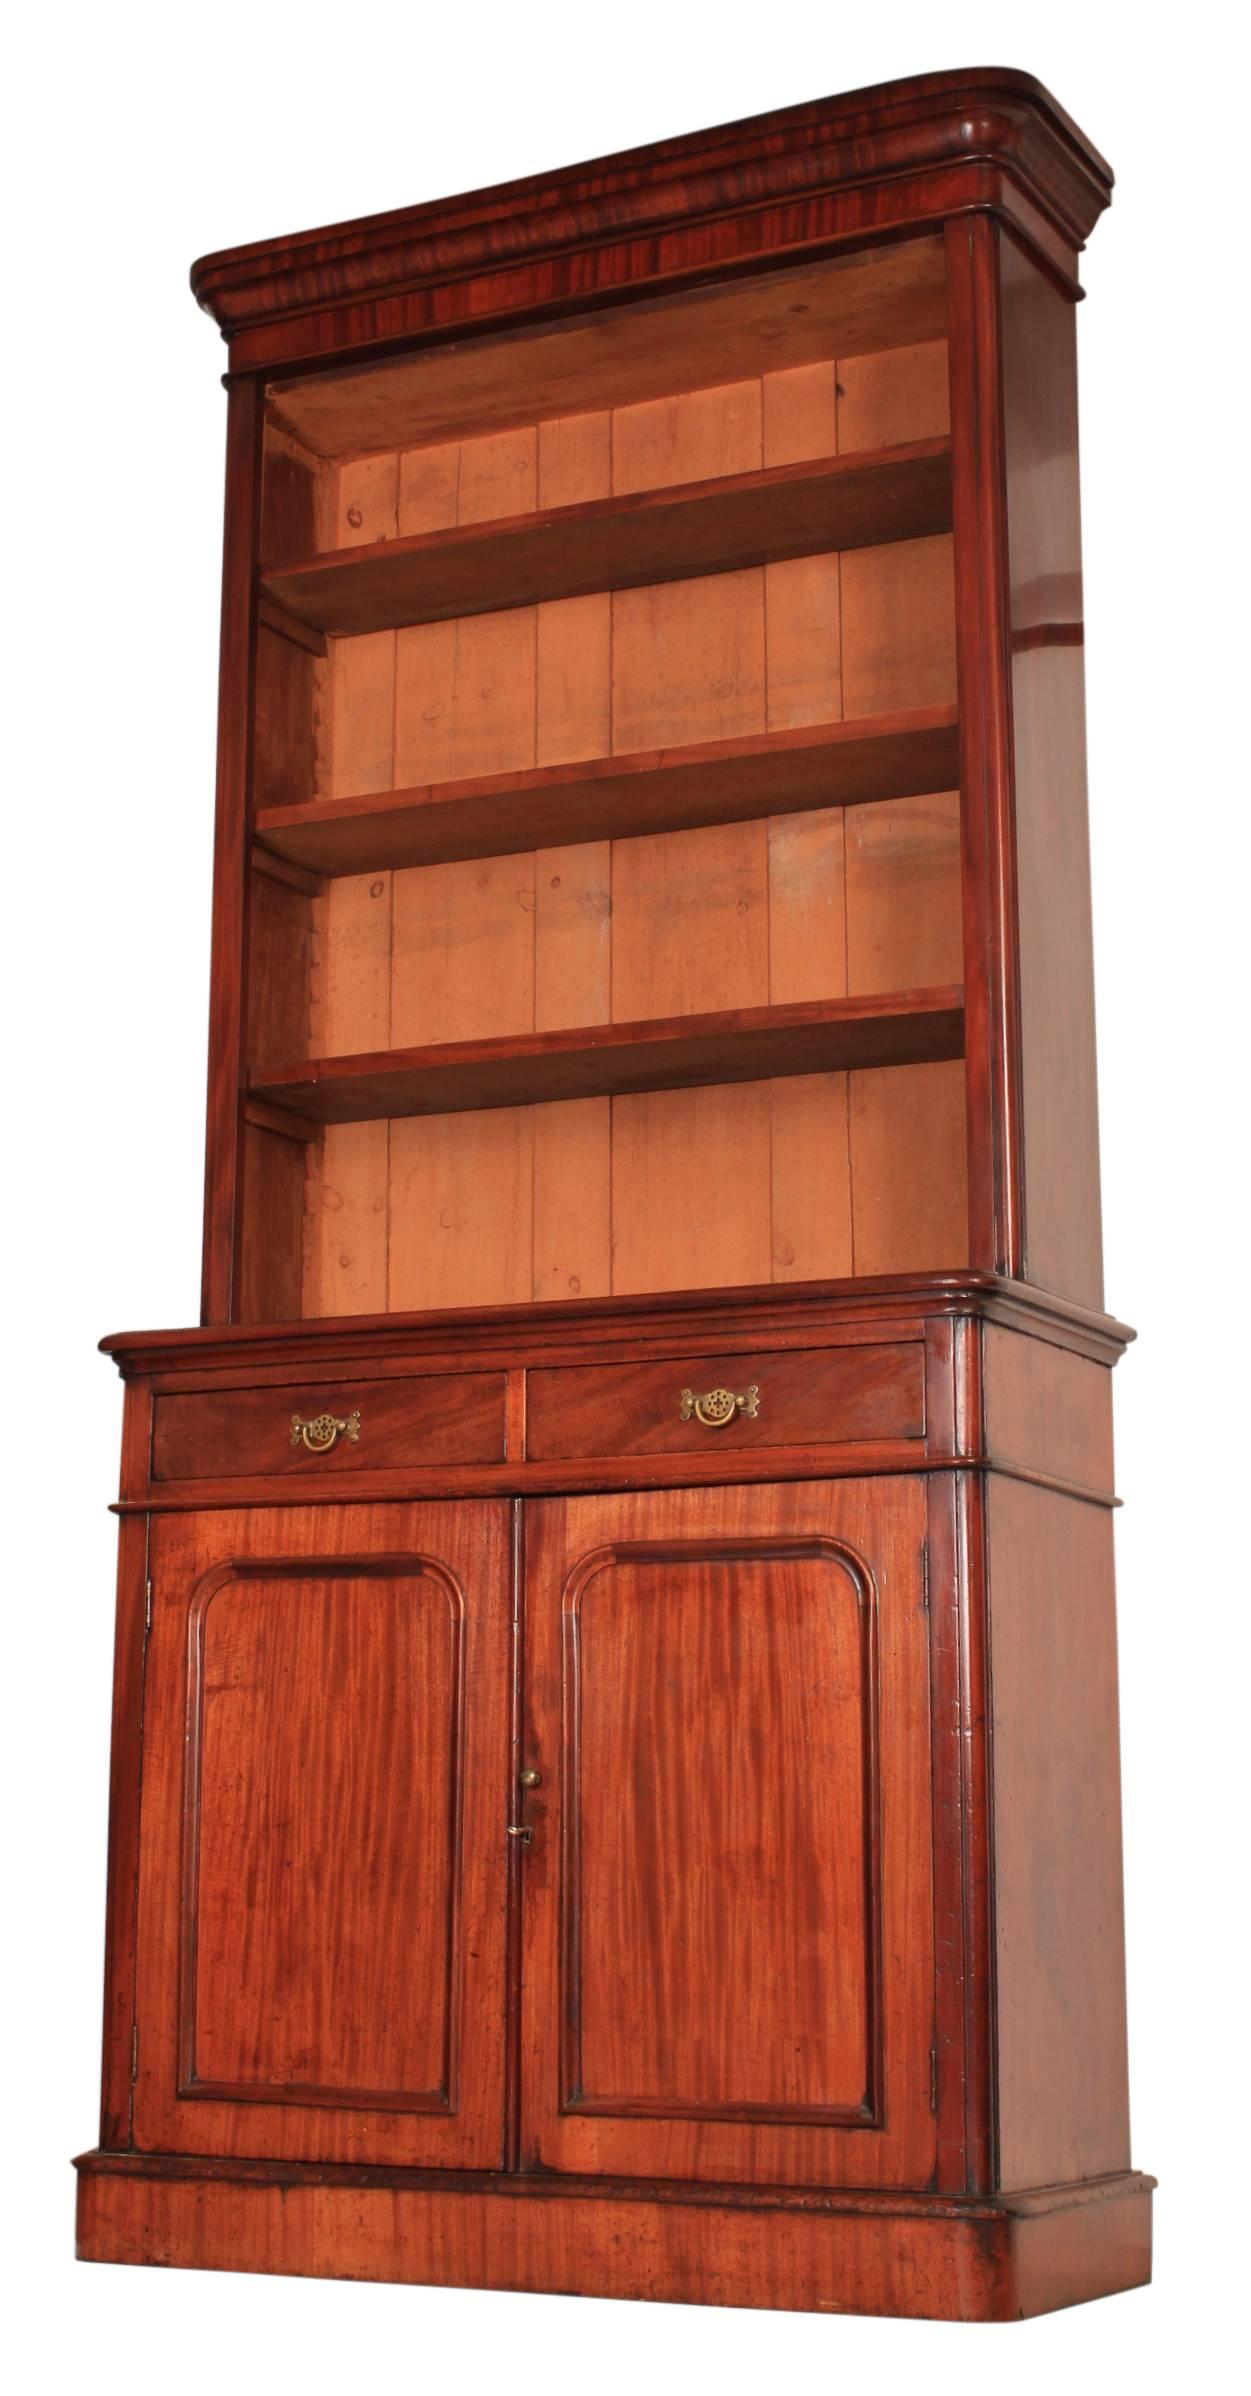 English, circa 1860.
A very tall mahogany bookcase in great original condition.
Cornice top over three adjustable shelves and on a base of two drawers over two doors.
The drawers are of solid mahogany dovetailed construction, with brass